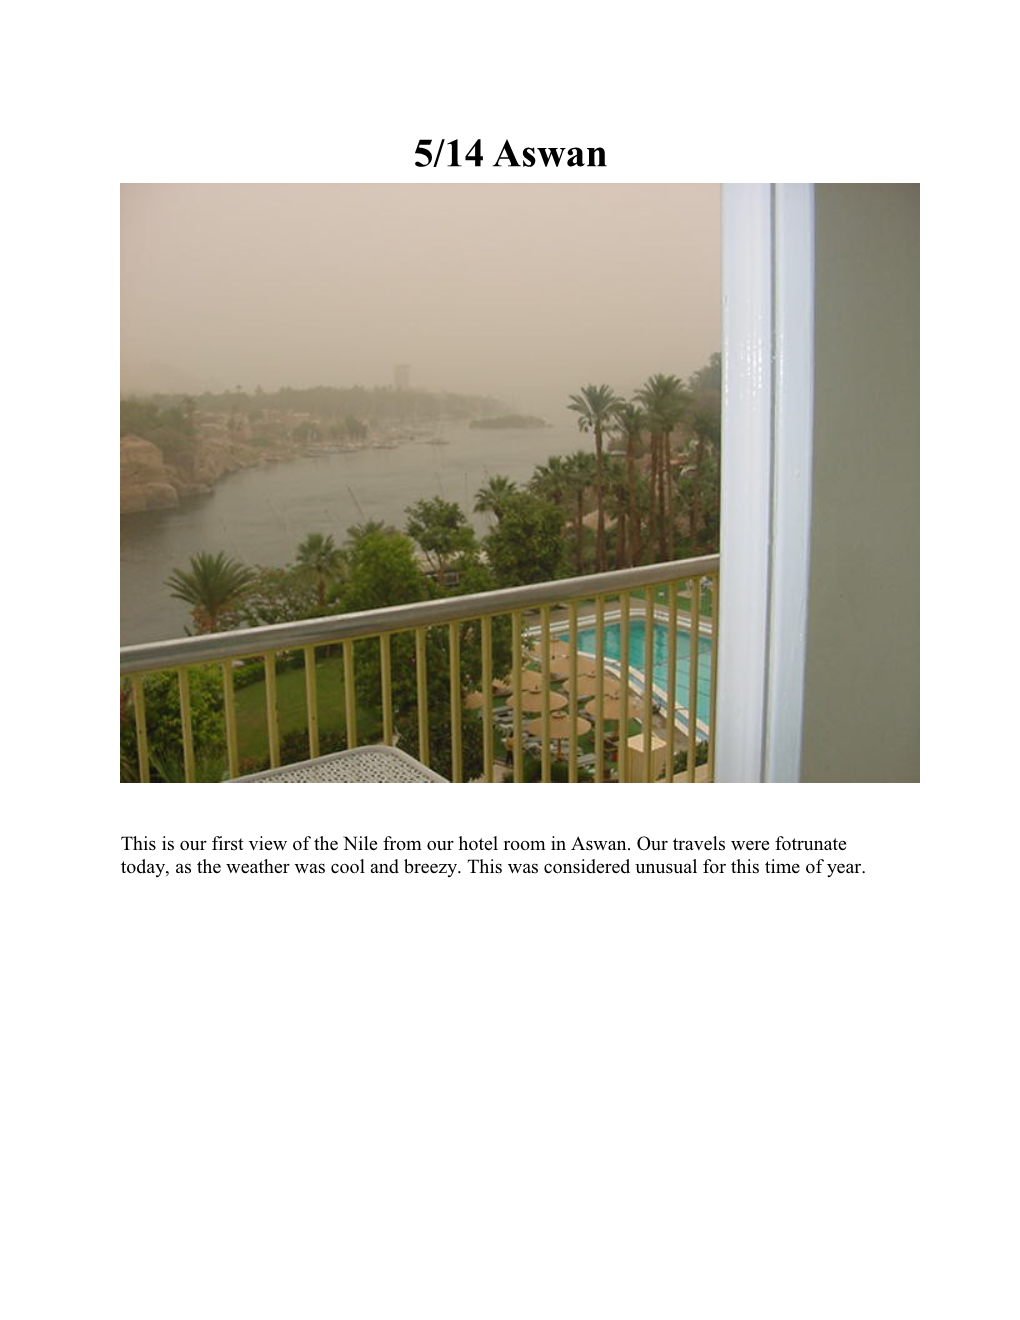 This Is Our First View of the Nile from Our Hotel Room in Aswan. Our Travels Were Fotrunate